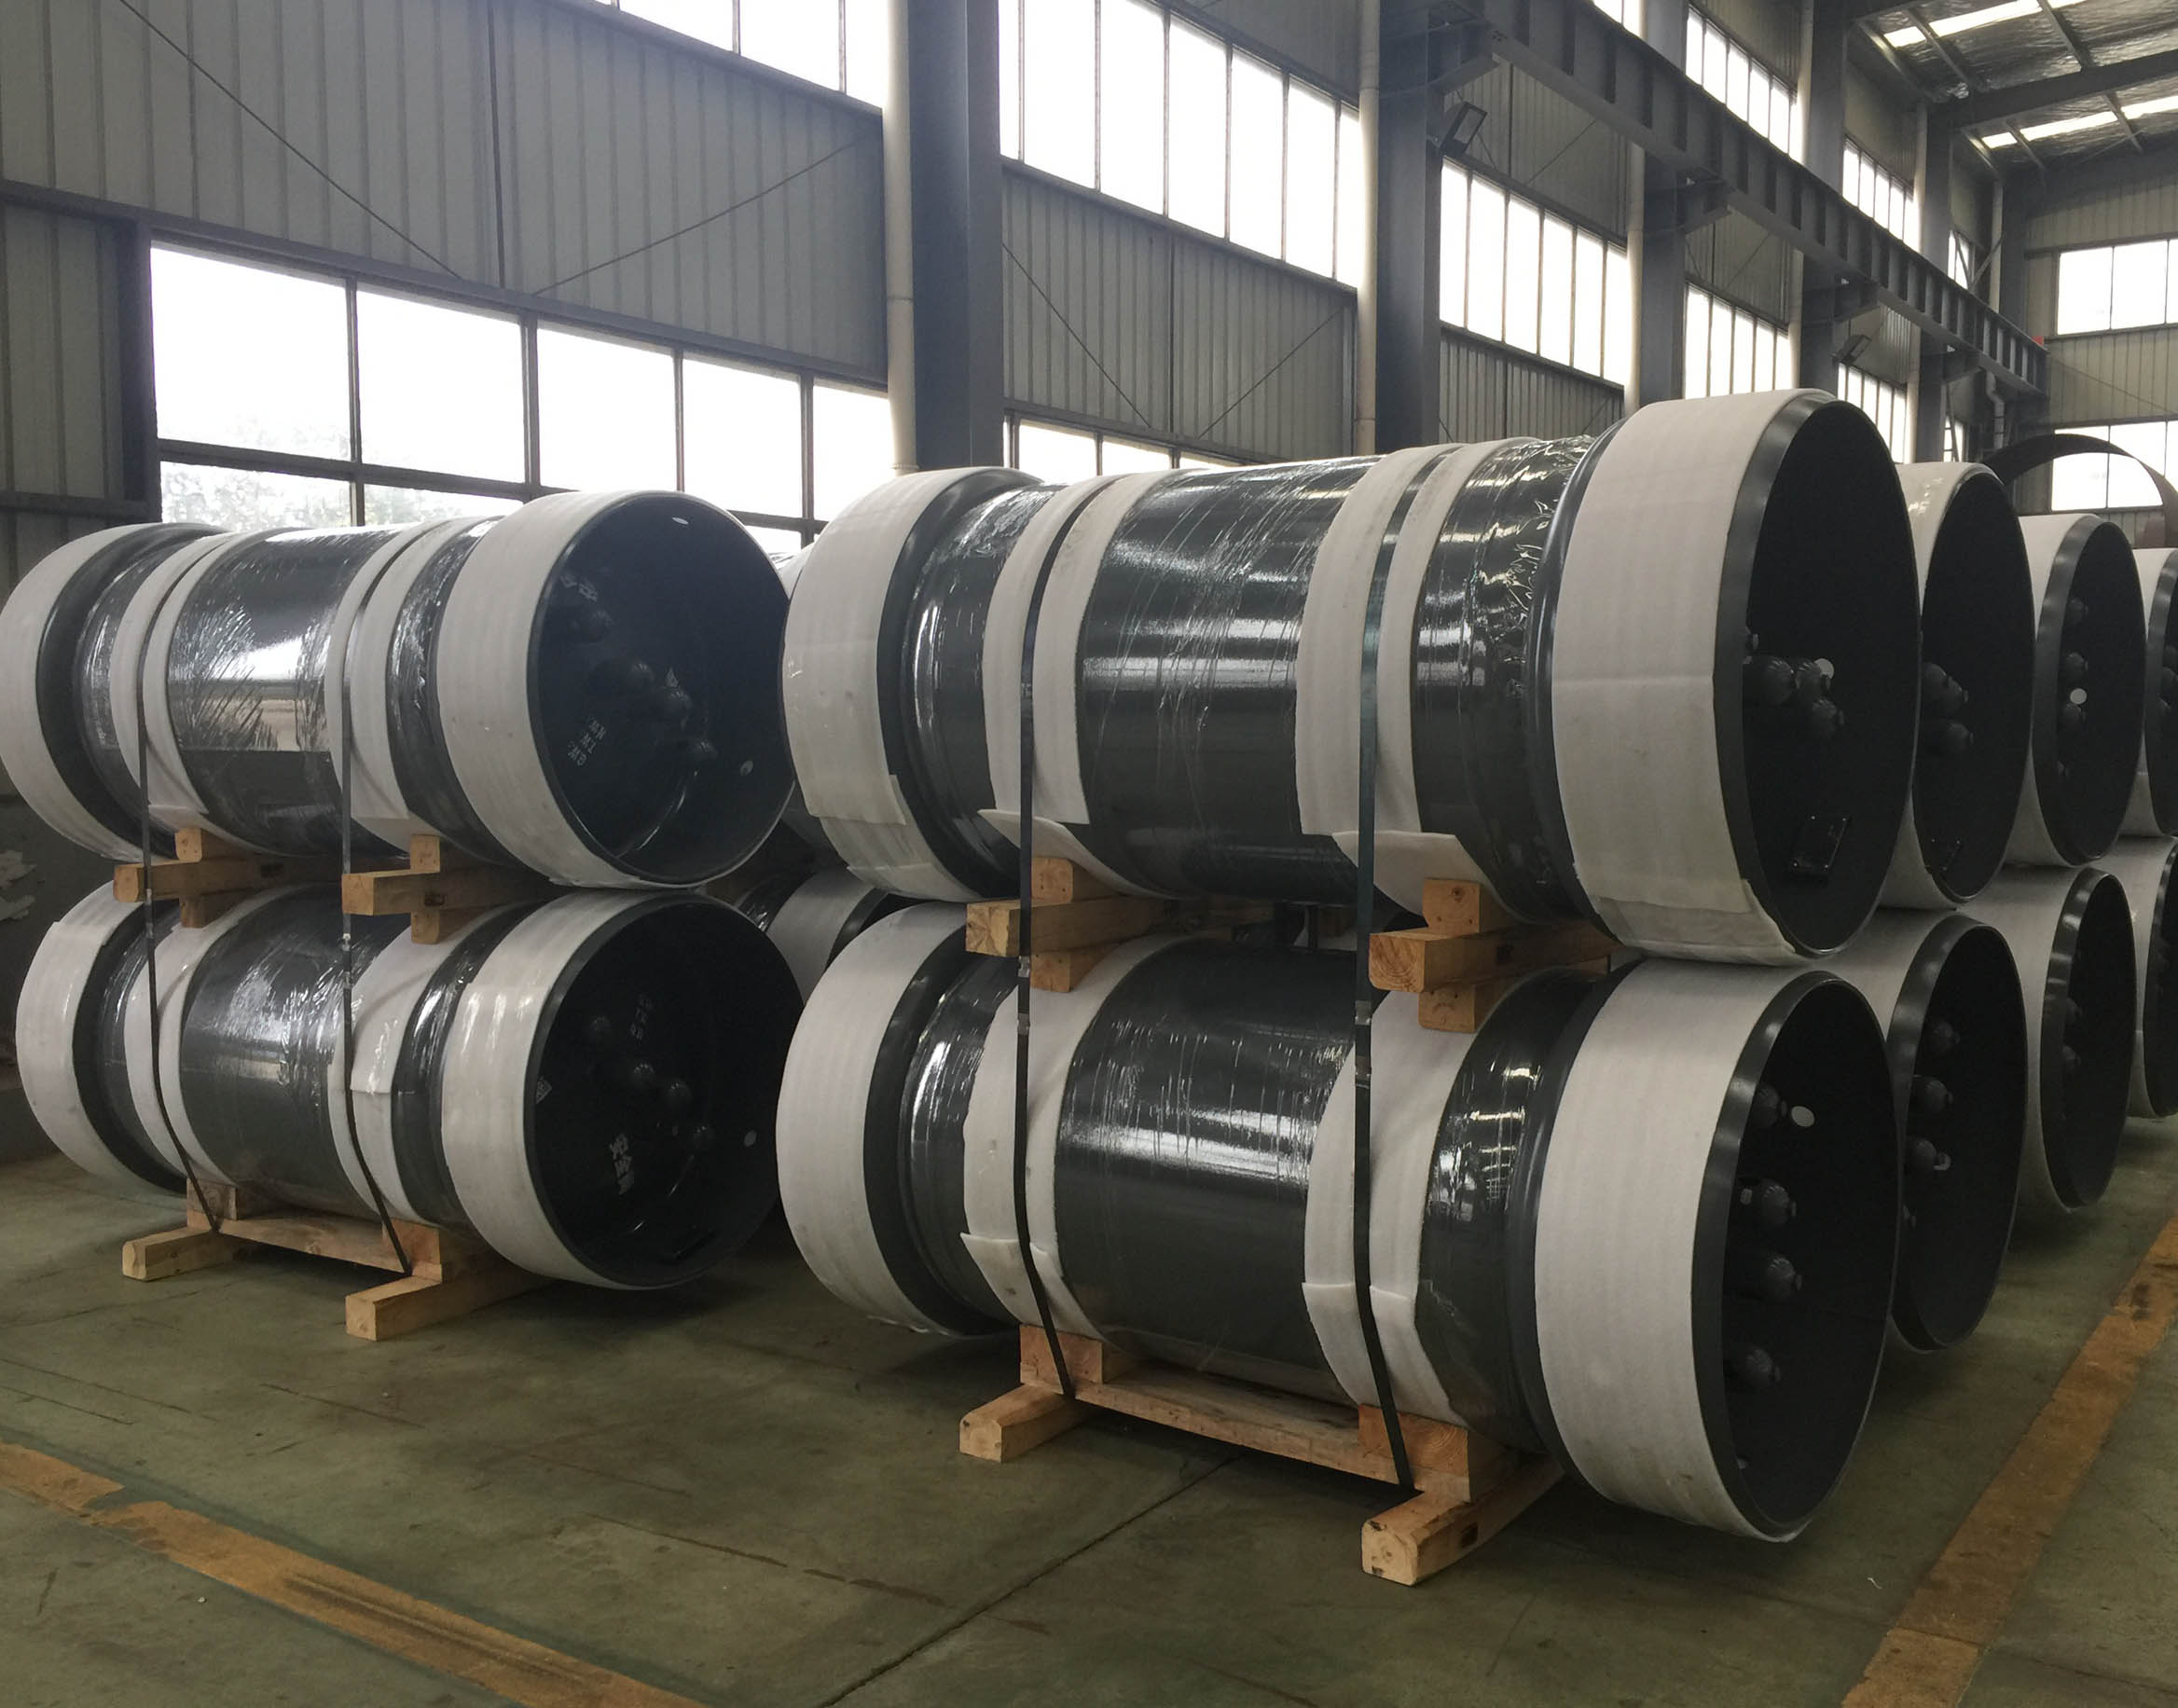 High purity refrigerant welded cylinders